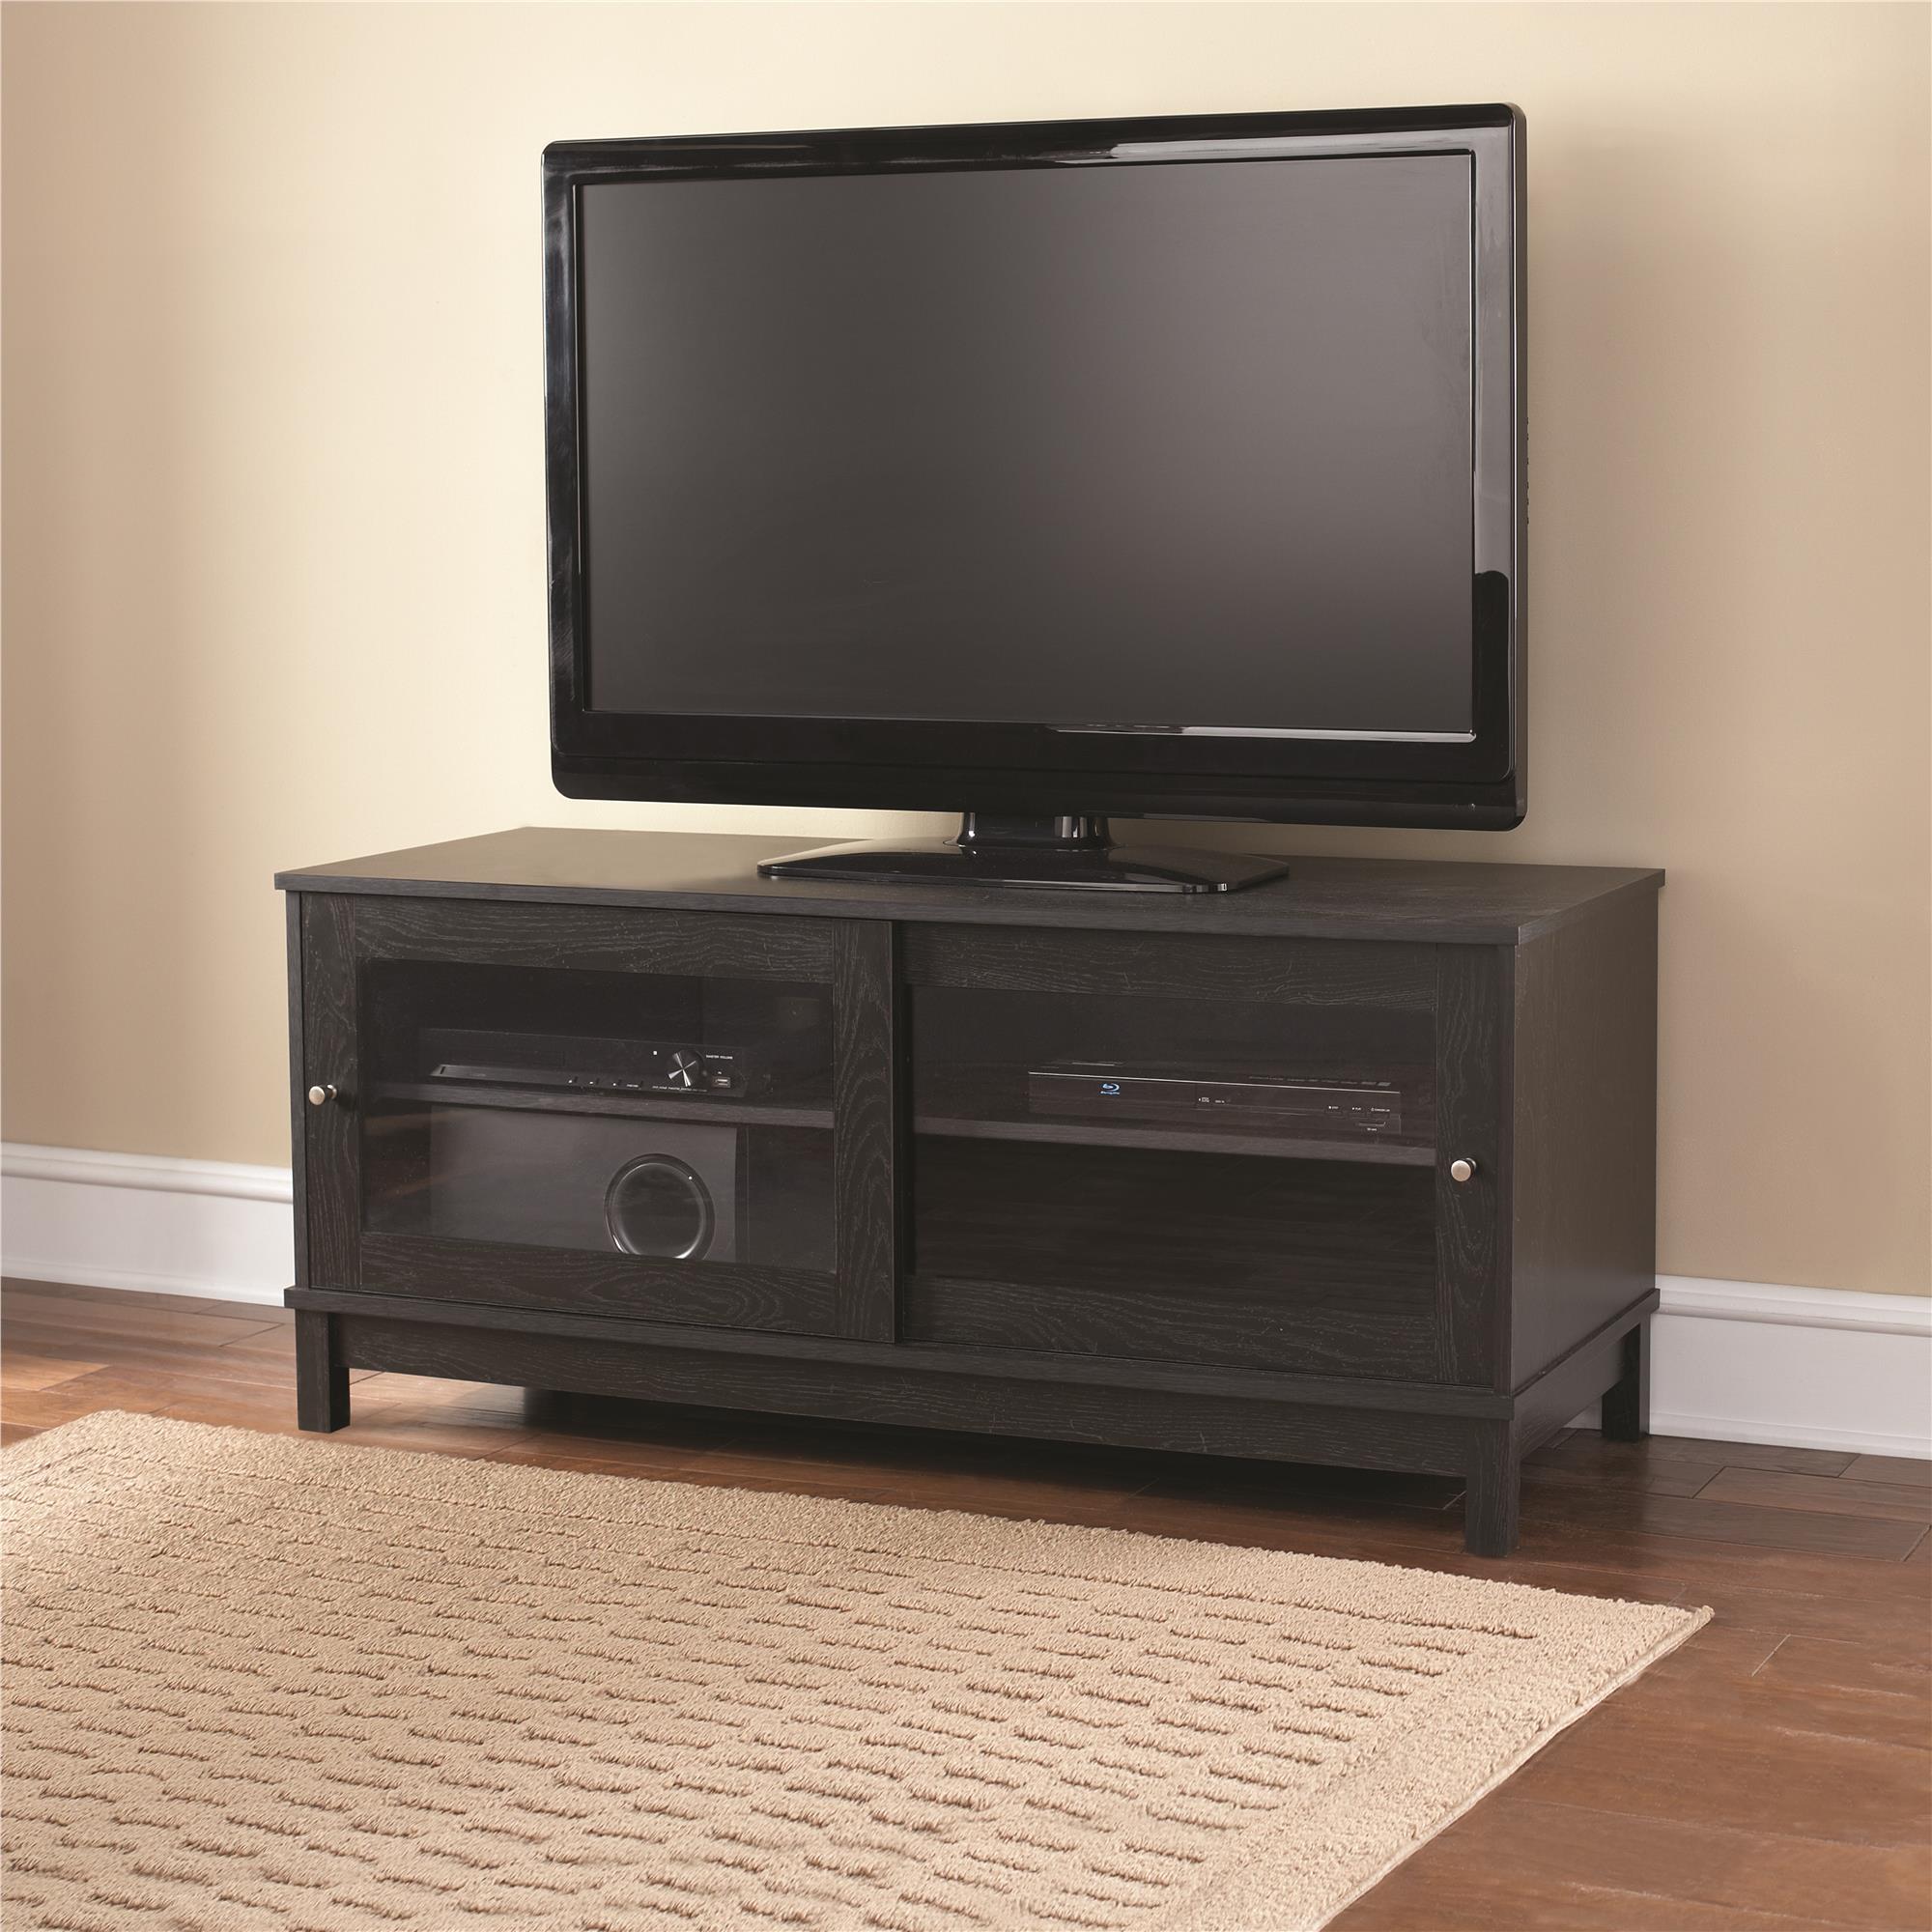 Mainstays TV Stand for TVs up to 55", Multiple Finishes - Black - image 2 of 9